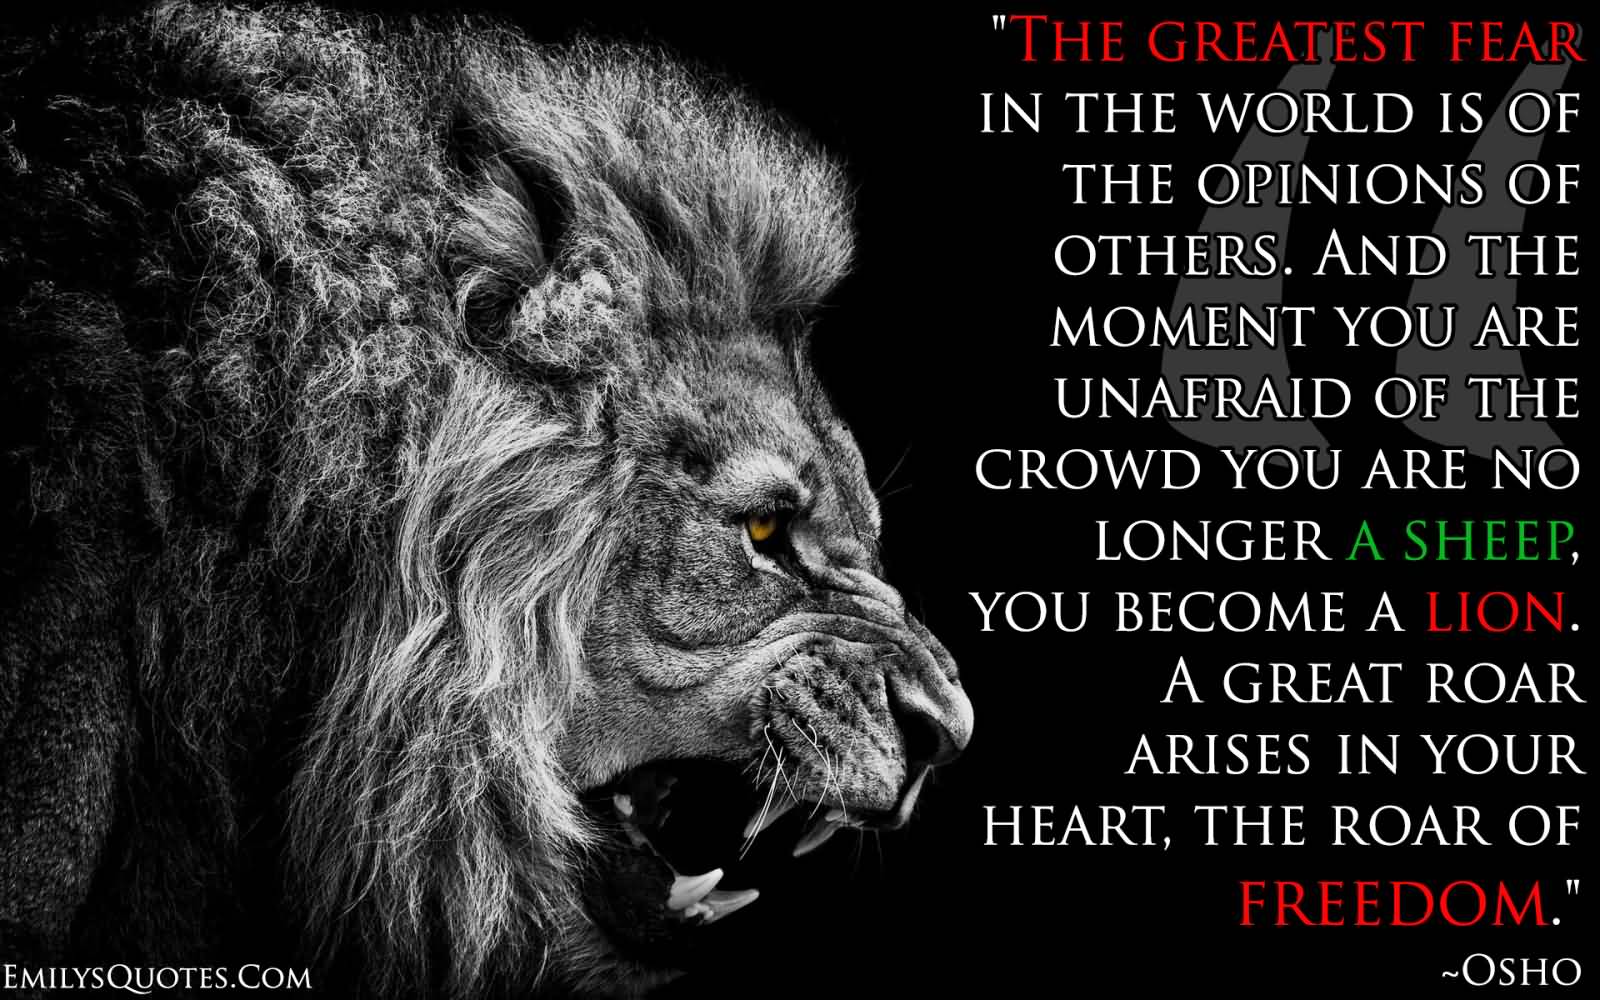 The greatest fear in the world is of the opinions of others. And the moment you are unafraid of the crowd you are no longer a sheep... Osho